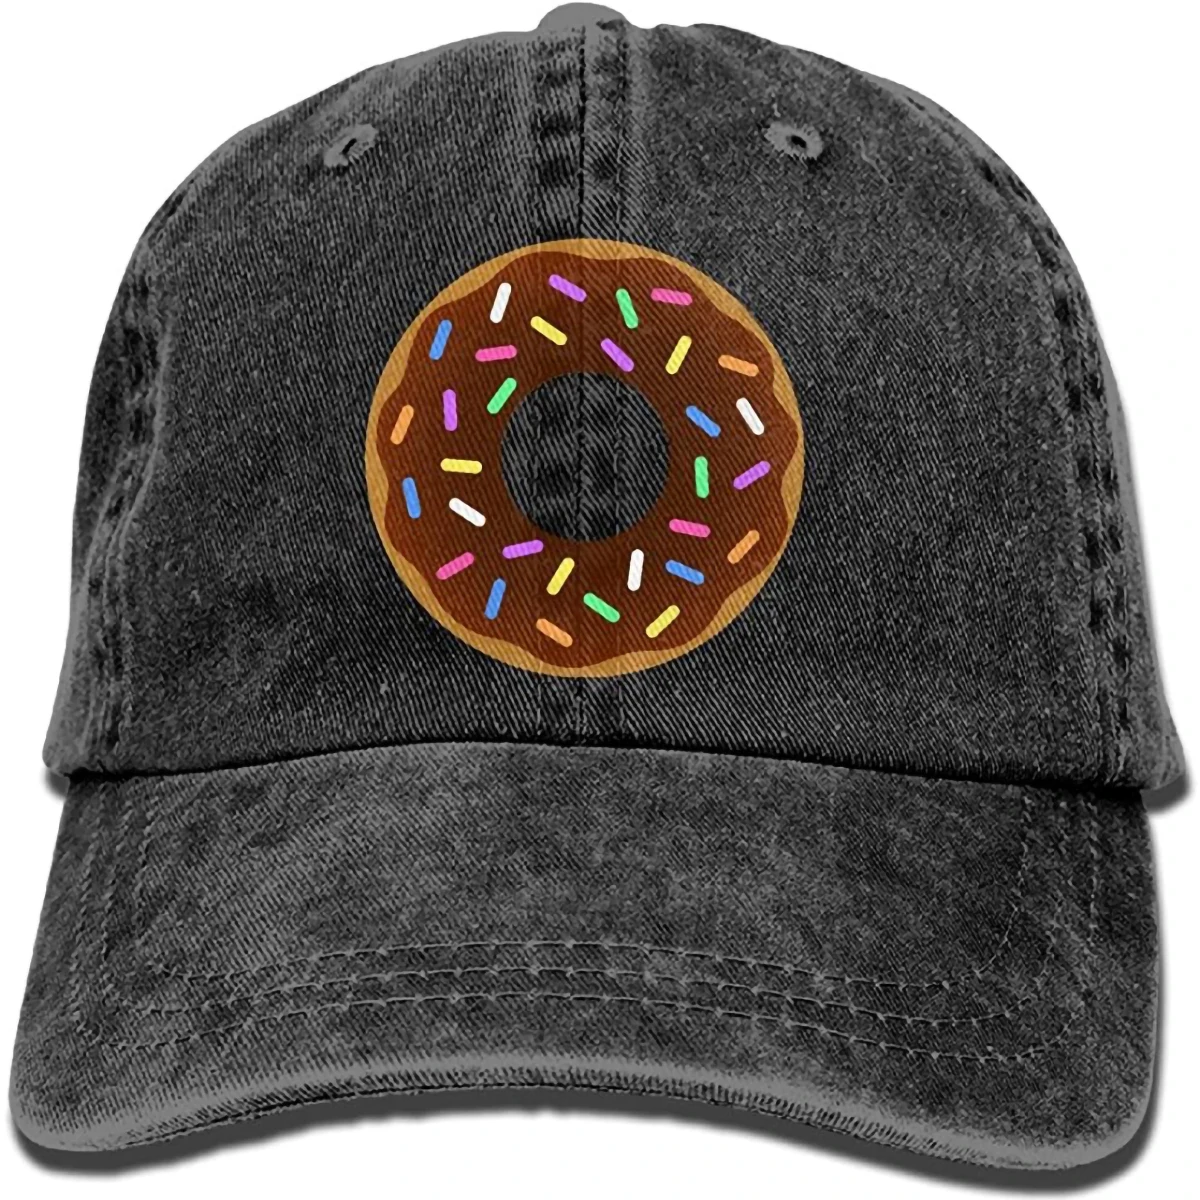 

Hats For Women Adults Donut Chocolate Sprinkles Adjustable Casual Cool Baseball Cap Retro Cowboy Hat Cotton Dyed Caps